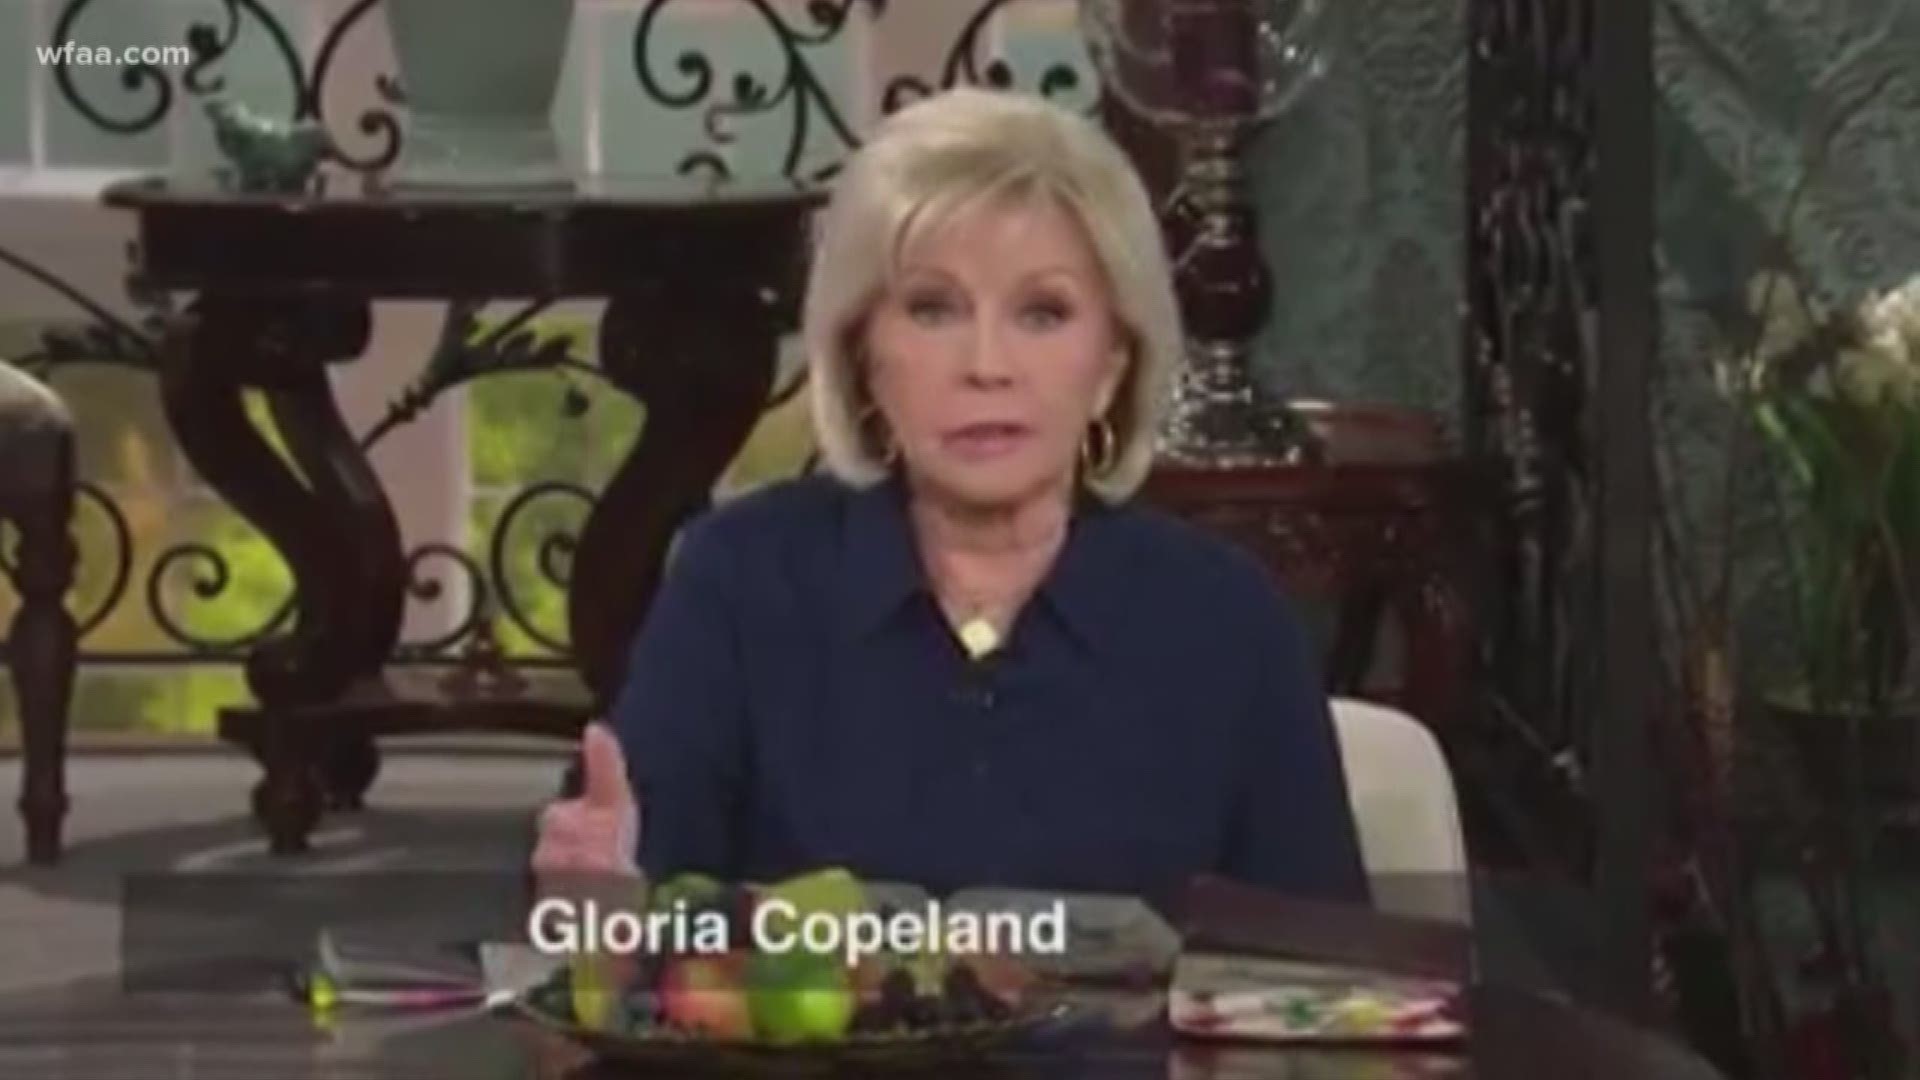 Gloria Copeland, wife of televangelist Kenneth Copeland, spoke to 1 million followers on her Facebook page Tuesday.